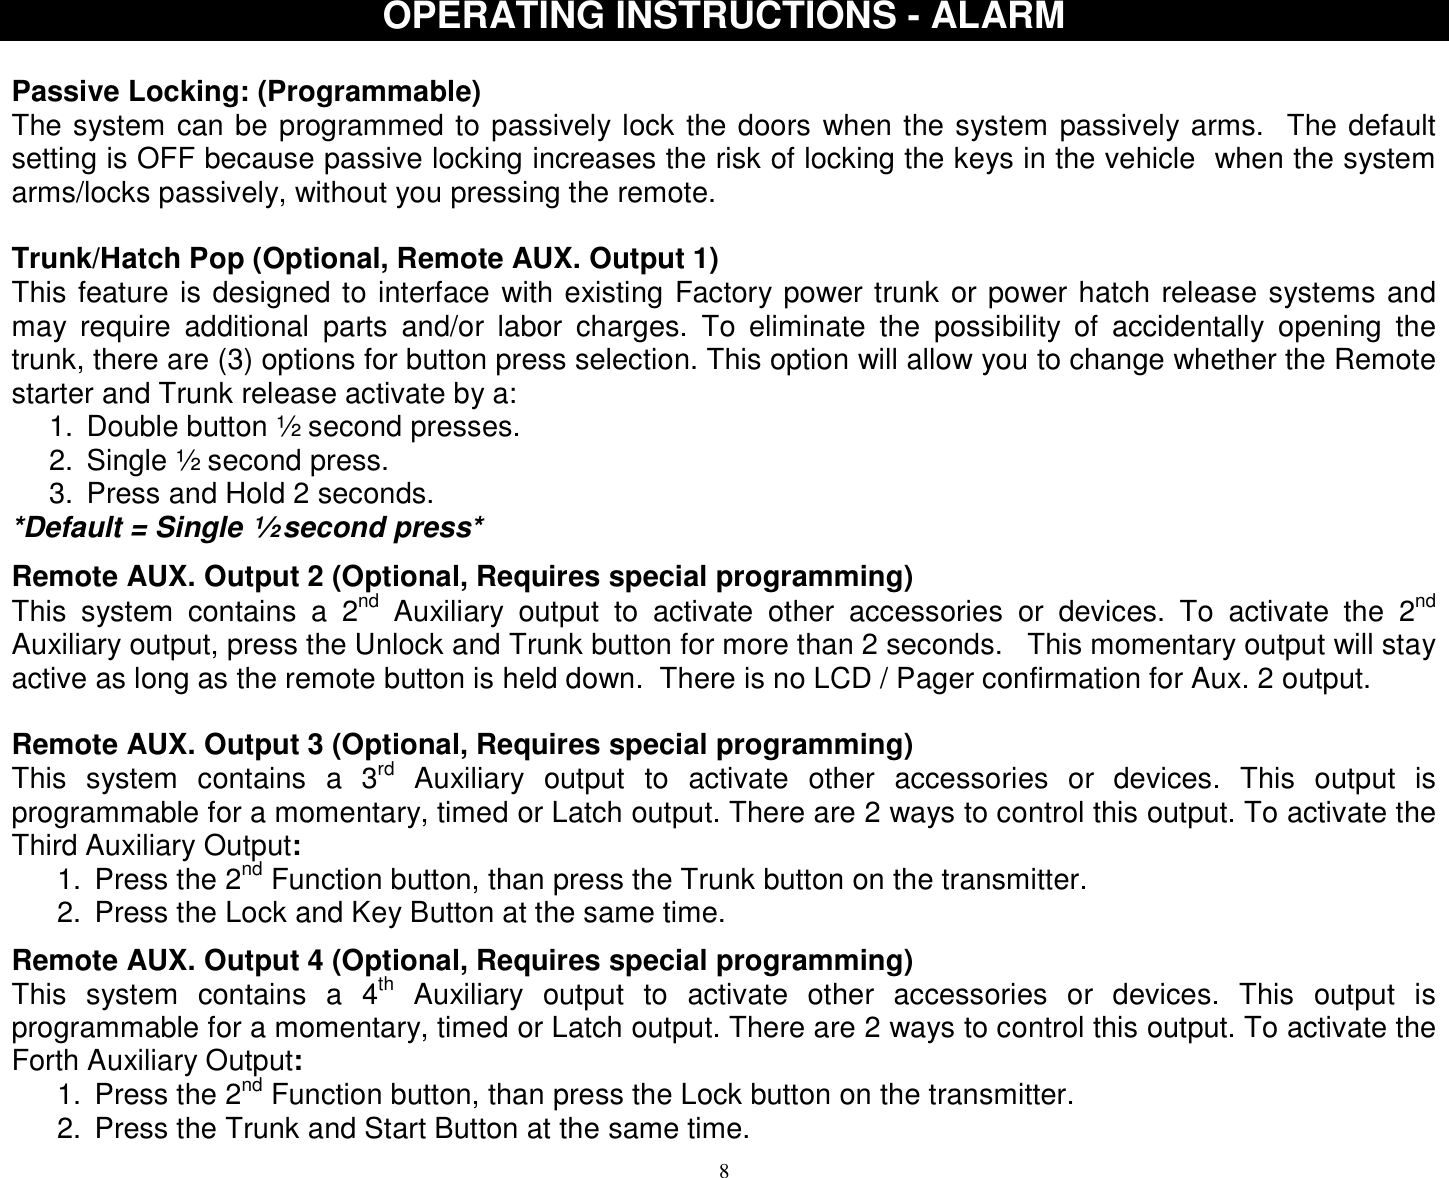  8OPERATING INSTRUCTIONS - ALARM  Passive Locking: (Programmable) The system can be programmed to passively lock the doors when the system passively arms.  The default setting is OFF because passive locking increases the risk of locking the keys in the vehicle  when the system arms/locks passively, without you pressing the remote.  Trunk/Hatch Pop (Optional, Remote AUX. Output 1) This feature is designed to interface with existing Factory power trunk or power hatch release systems and may require additional parts and/or labor charges. To eliminate the possibility of accidentally opening the trunk, there are (3) options for button press selection. This option will allow you to change whether the Remote starter and Trunk release activate by a: 1. Double button ½ second presses. 2. Single ½ second press. 3. Press and Hold 2 seconds. *Default = Single ½ second press*  Remote AUX. Output 2 (Optional, Requires special programming) This system contains a 2nd Auxiliary output to activate other accessories or devices. To activate the 2nd Auxiliary output, press the Unlock and Trunk button for more than 2 seconds.   This momentary output will stay active as long as the remote button is held down.  There is no LCD / Pager confirmation for Aux. 2 output.  Remote AUX. Output 3 (Optional, Requires special programming) This system contains a 3rd Auxiliary output to activate other accessories or devices. This output is programmable for a momentary, timed or Latch output. There are 2 ways to control this output. To activate the Third Auxiliary Output: 1. Press the 2nd Function button, than press the Trunk button on the transmitter. 2. Press the Lock and Key Button at the same time.  Remote AUX. Output 4 (Optional, Requires special programming) This system contains a 4th Auxiliary output to activate other accessories or devices. This output is programmable for a momentary, timed or Latch output. There are 2 ways to control this output. To activate the Forth Auxiliary Output: 1. Press the 2nd Function button, than press the Lock button on the transmitter. 2. Press the Trunk and Start Button at the same time.  